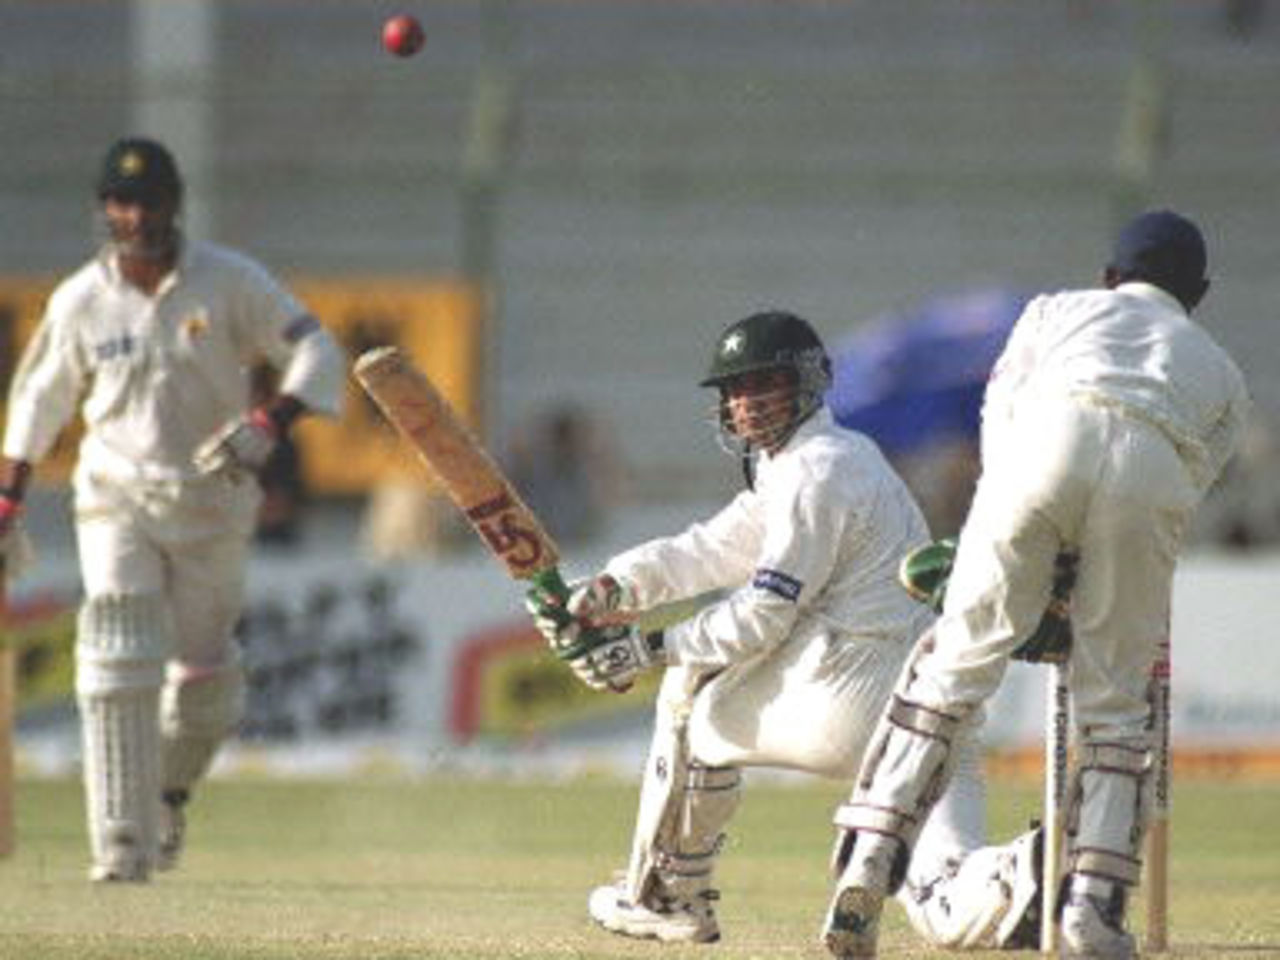 Pakistani skipper Moin Khan (C) sweeps for a boundary off Sri Lankan spinner Muttiah Muralitharan on the third day of the third and final cricket Test in Karachi, 14 March 2000. Khan was on 51 as Pakistan were 375-7.